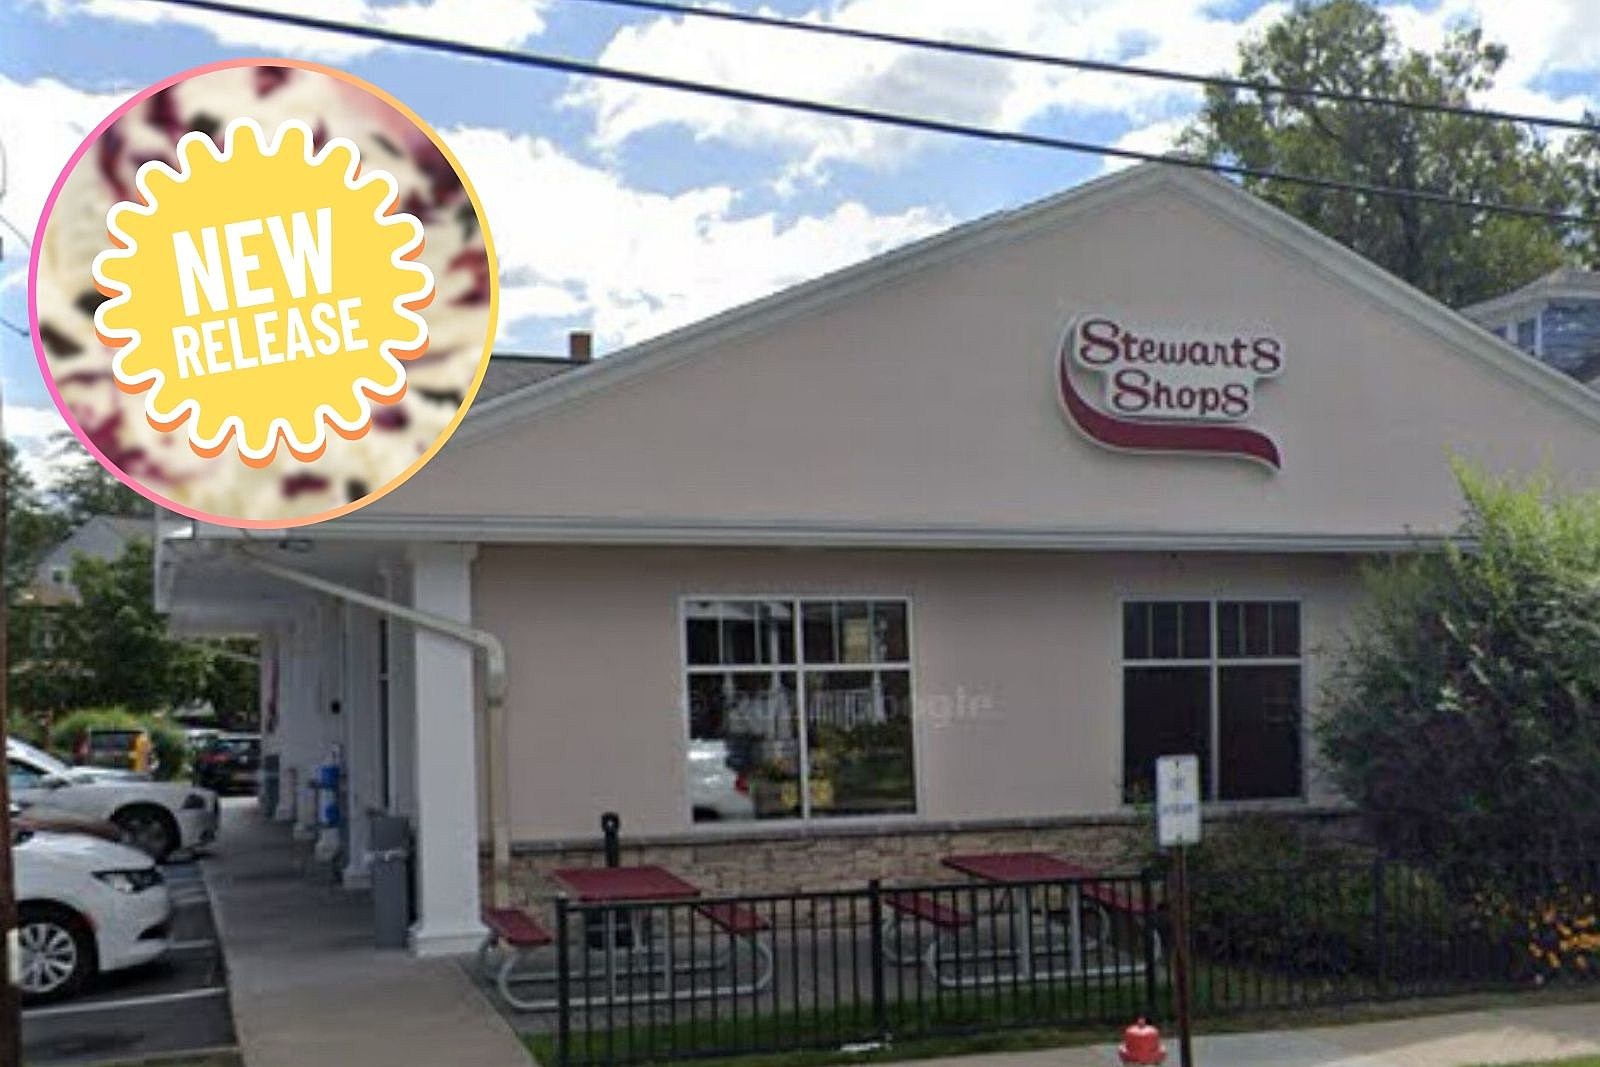 Stewart's releases five new ice cream flavors and brings back a